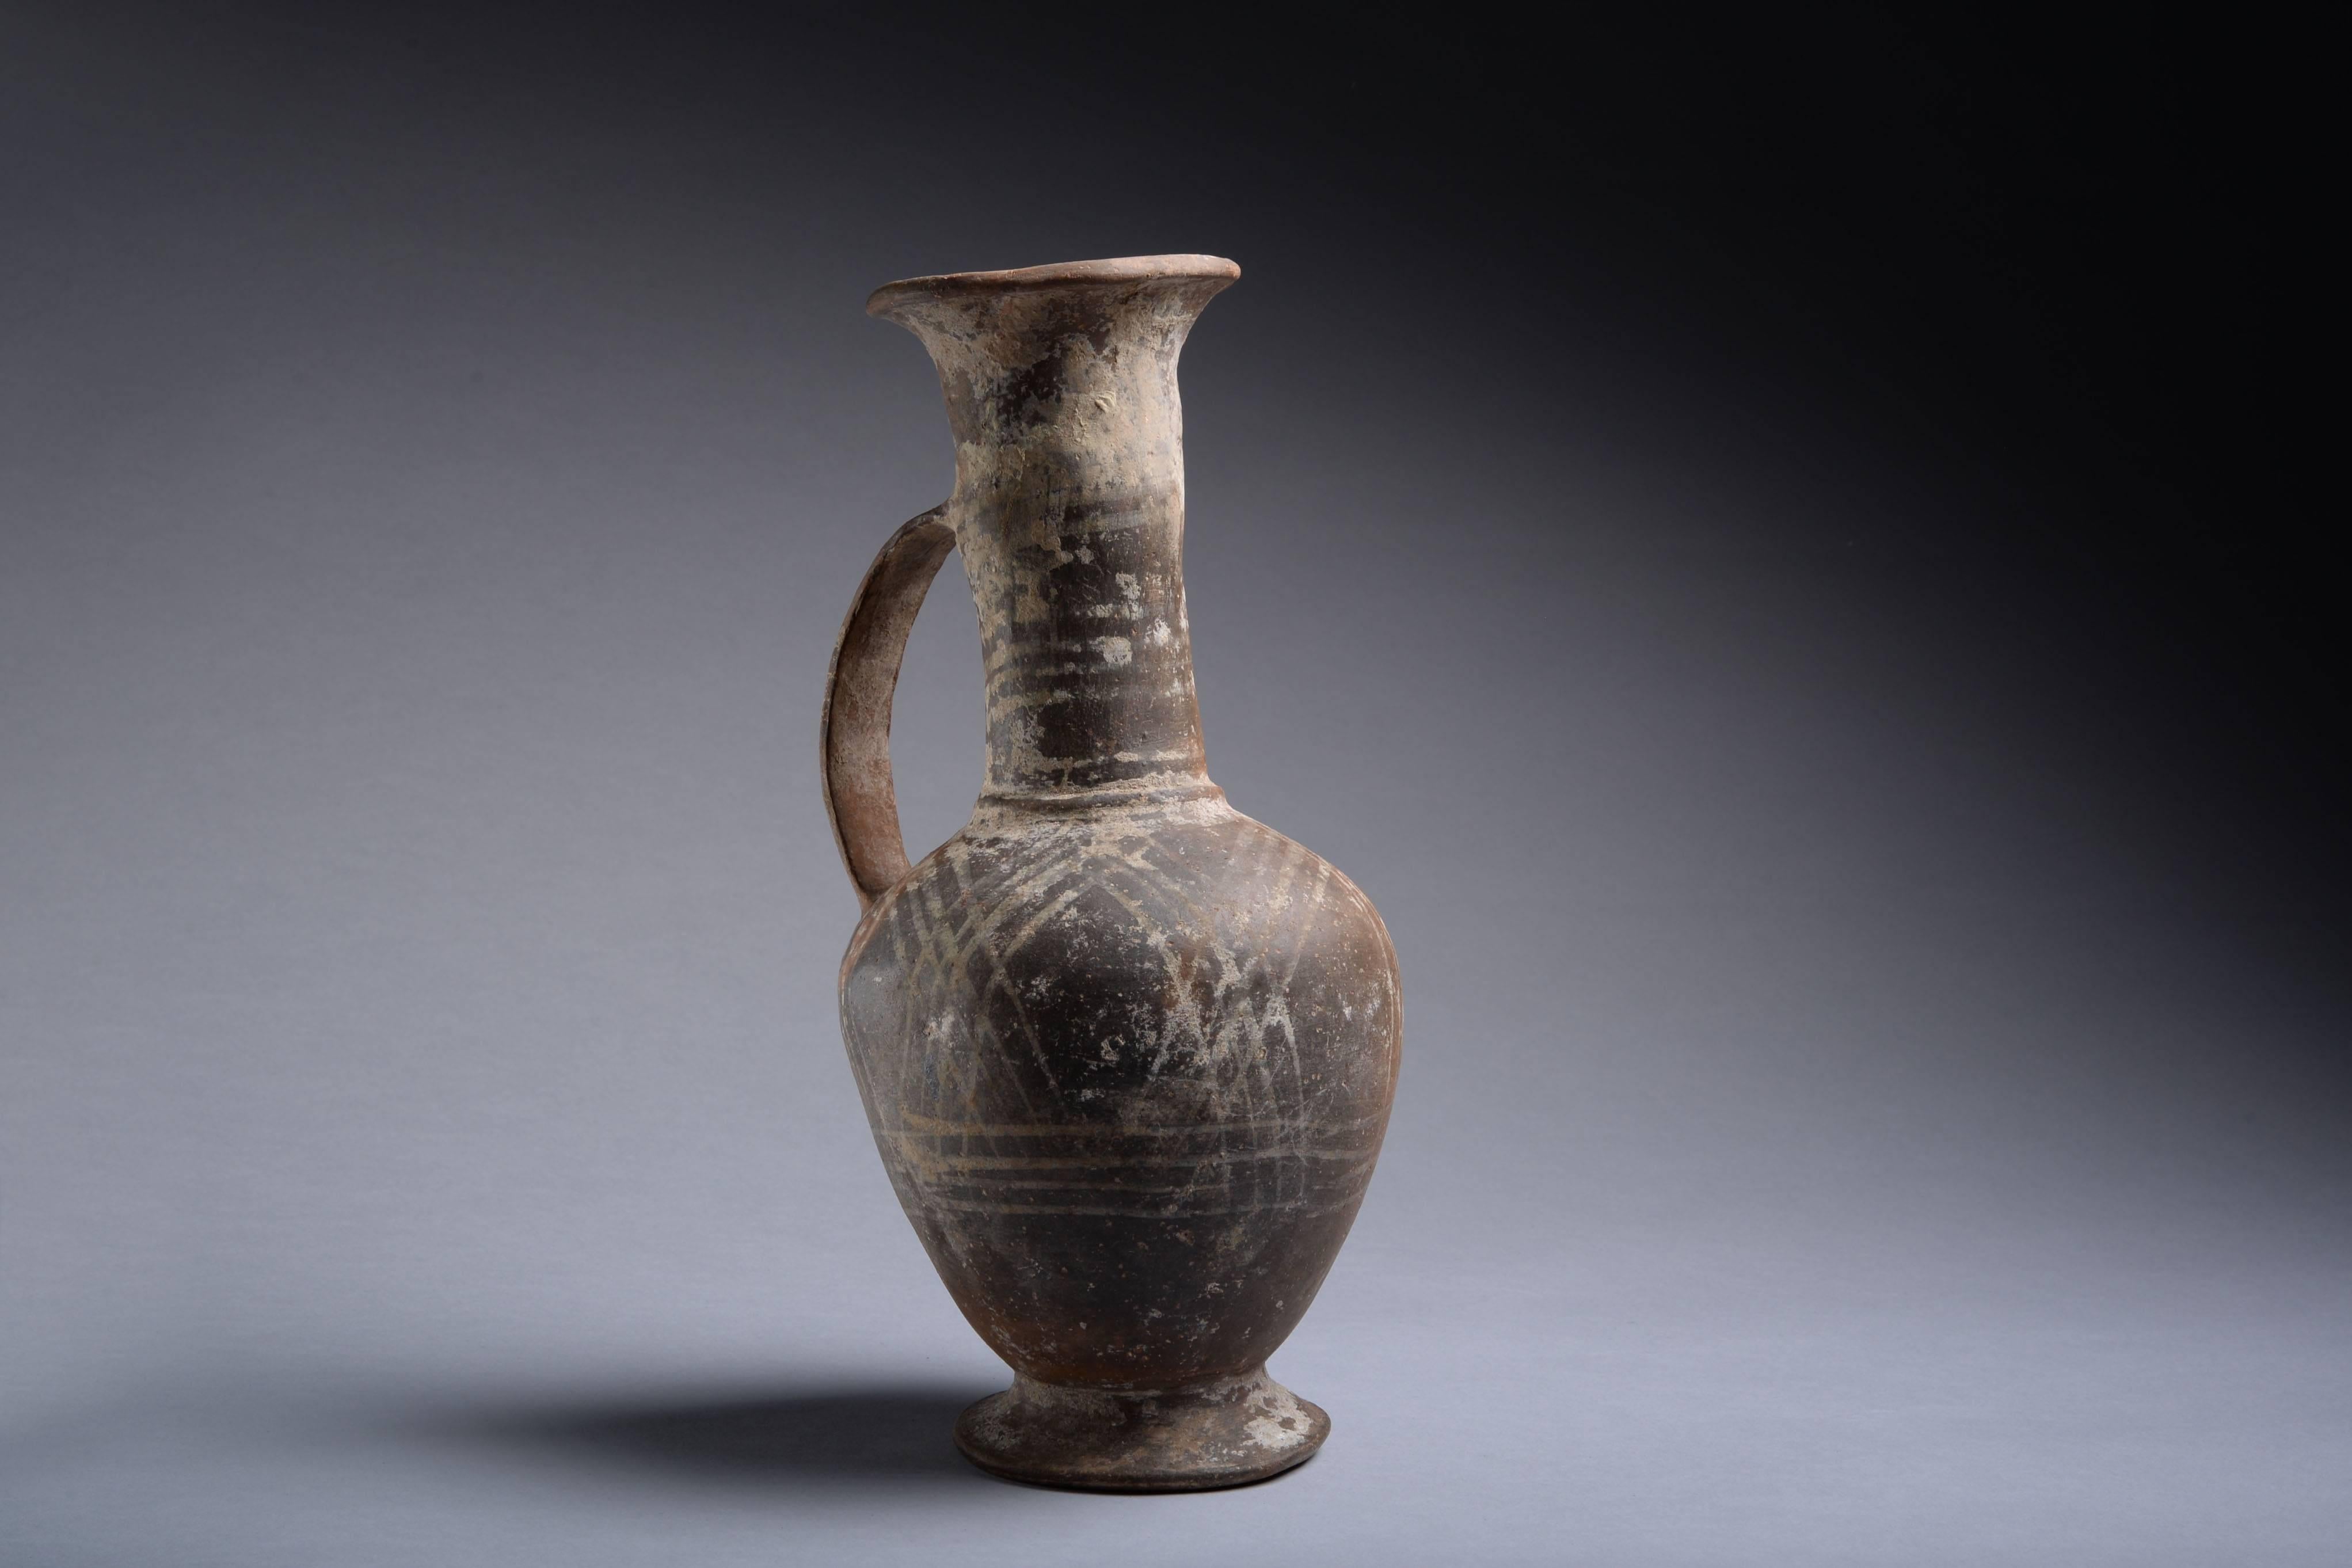 A base ring ware jug from Cyprus, dating to the Late Bronze Age, circa 1550-1200 BC.

With ring base, plump body, cylindrical neck, rimmed mouth and strap handle. Potted from orange clay and covered with a mottled orange and grey slip and